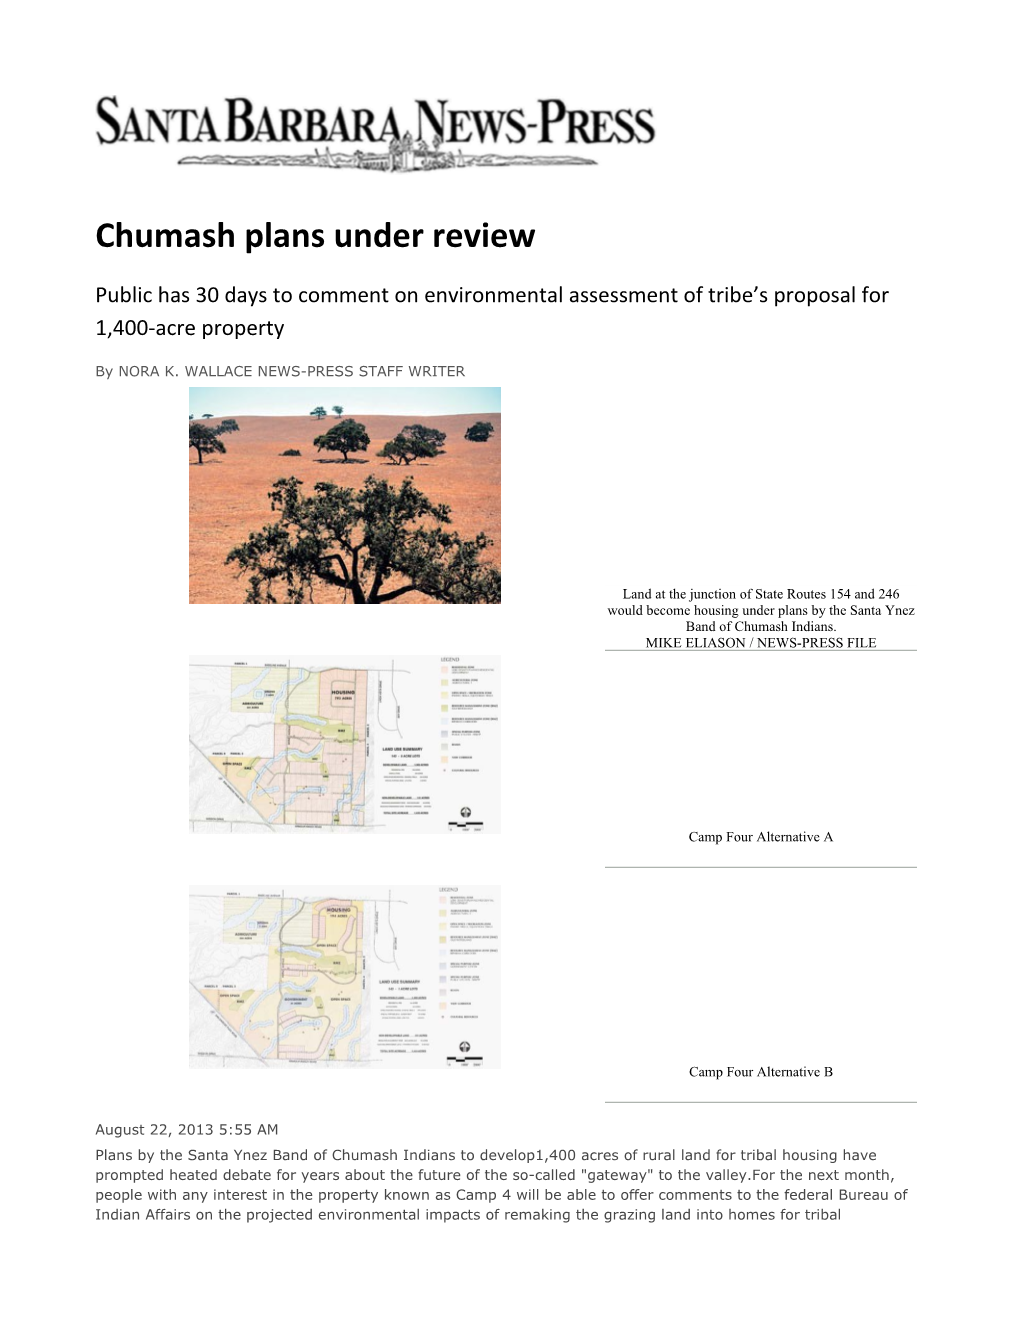 Chumash Plans Under Review